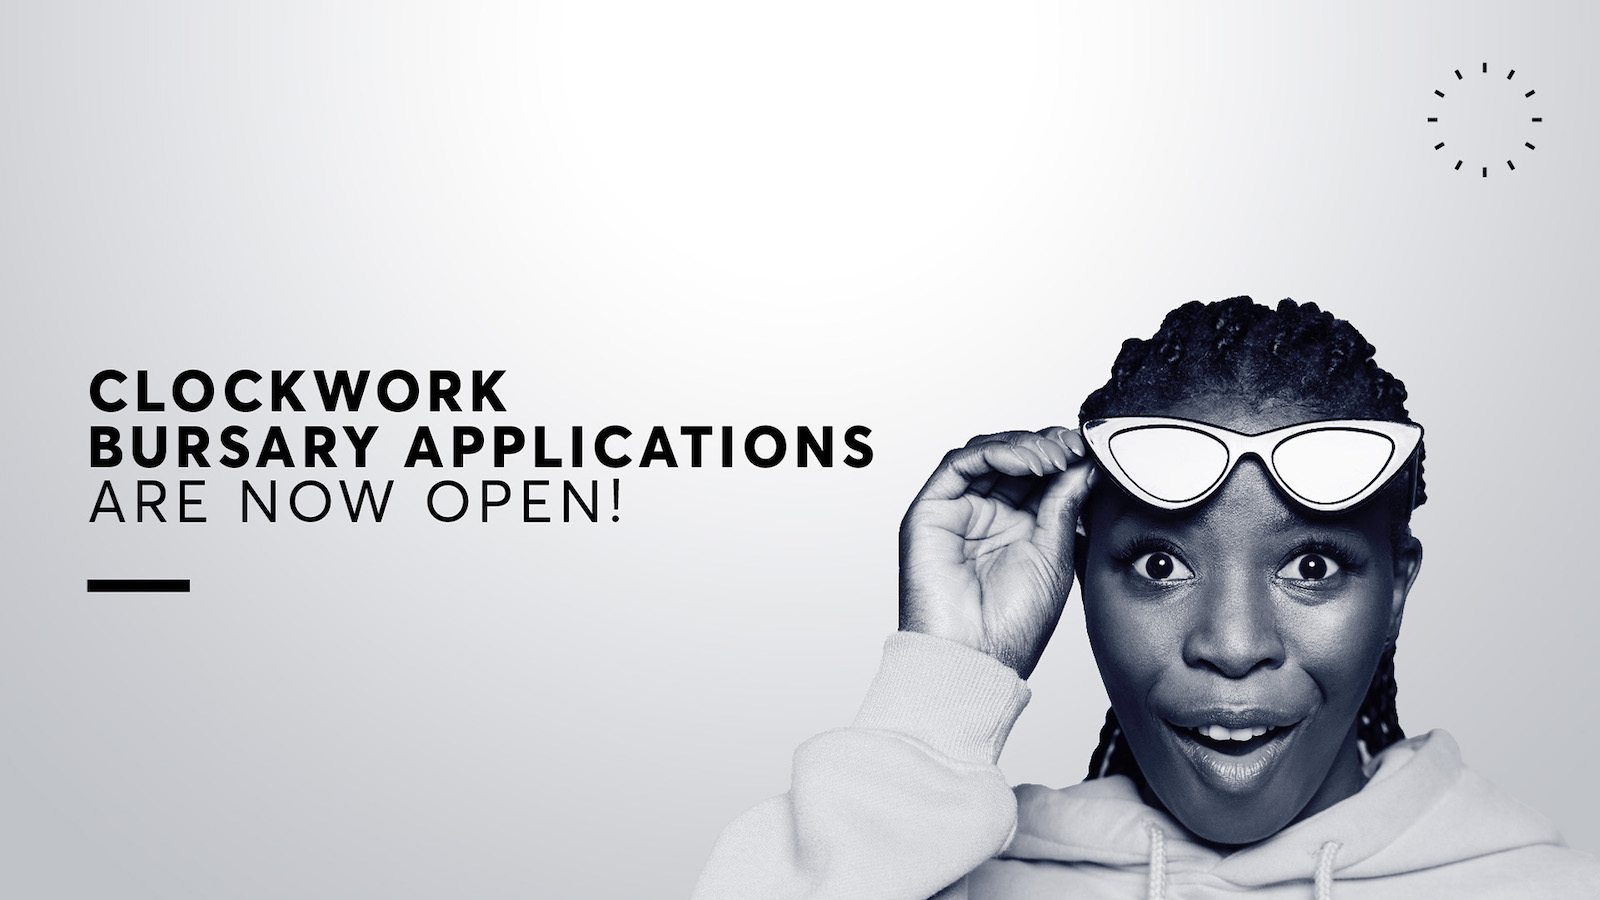 Lifechanging Opportunity For Young South Africans Who Are Passionate About Marketing! The Clockwork Bursary Applications For Marketing And Media Studies Are Now Open